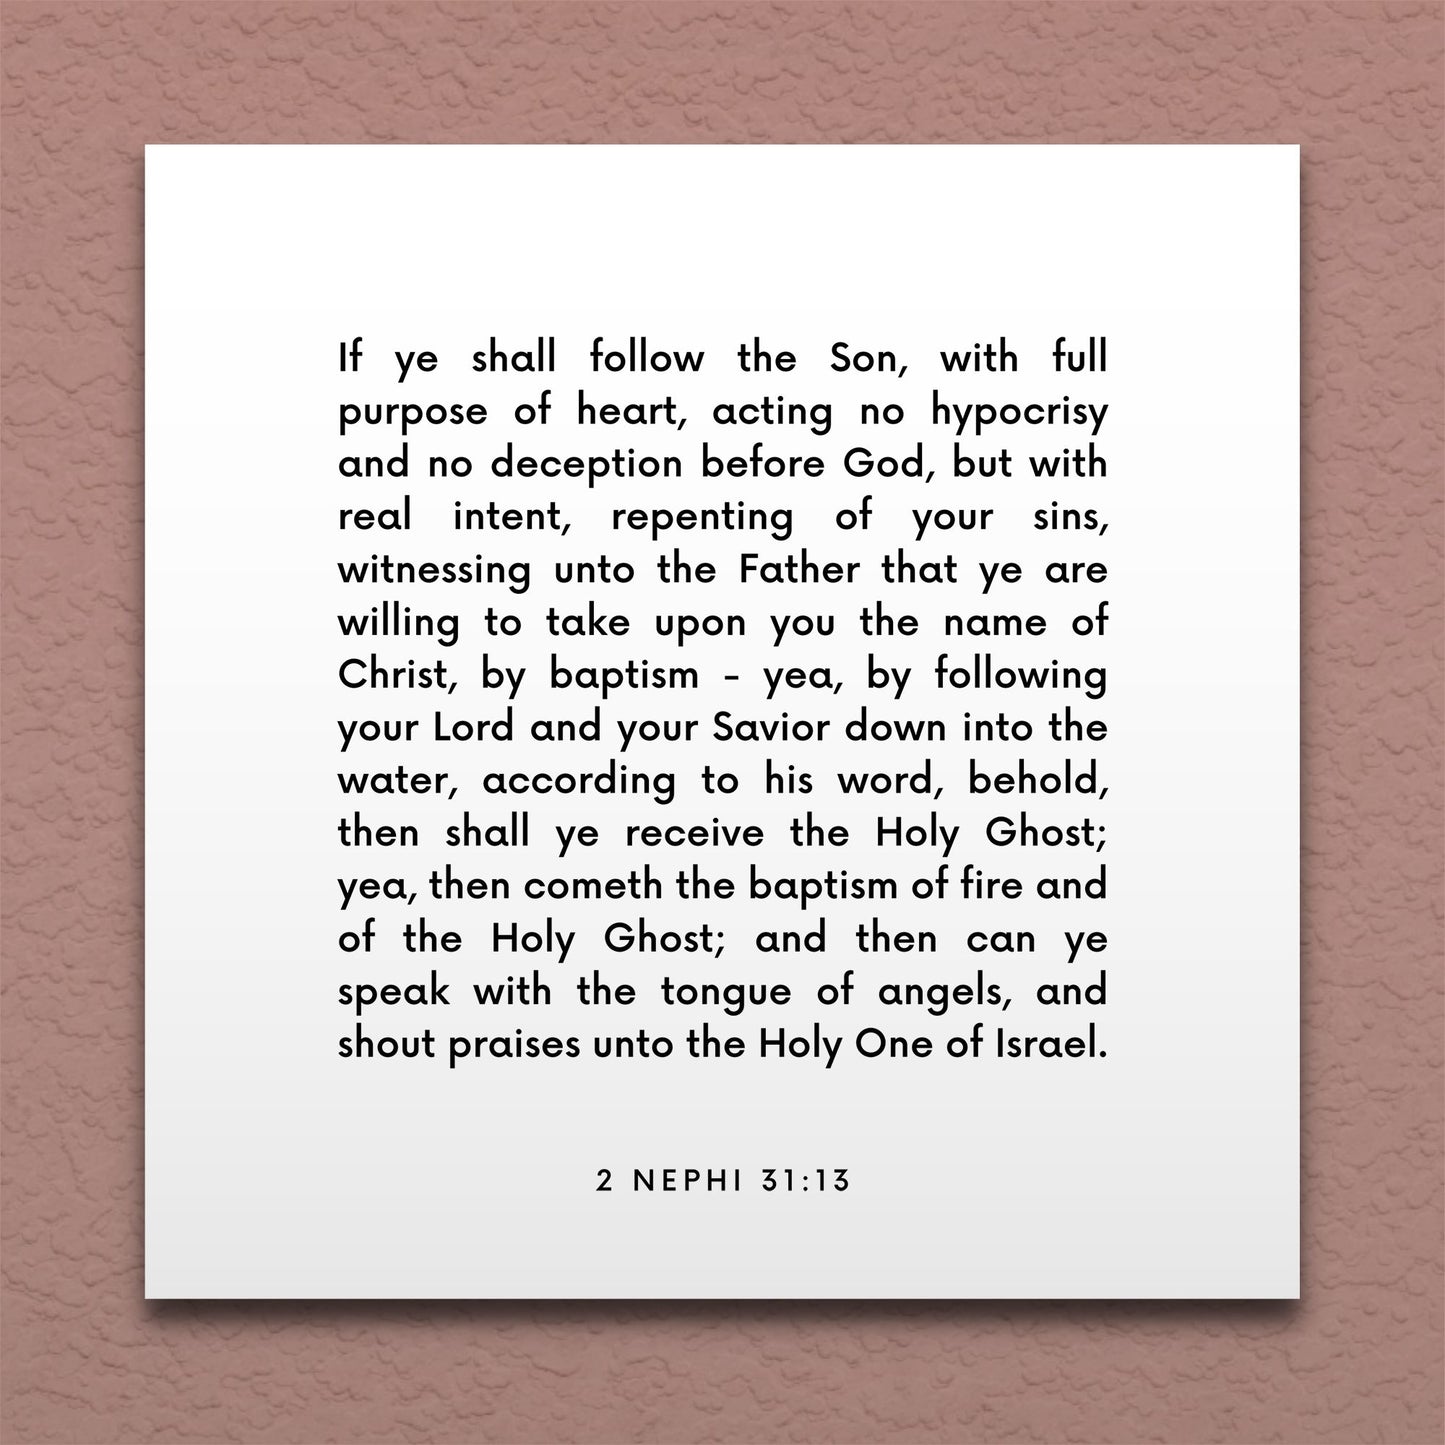 Wall-mounted scripture tile for 2 Nephi 31:13 - "If ye shall follow the Son, with full purpose of heart"